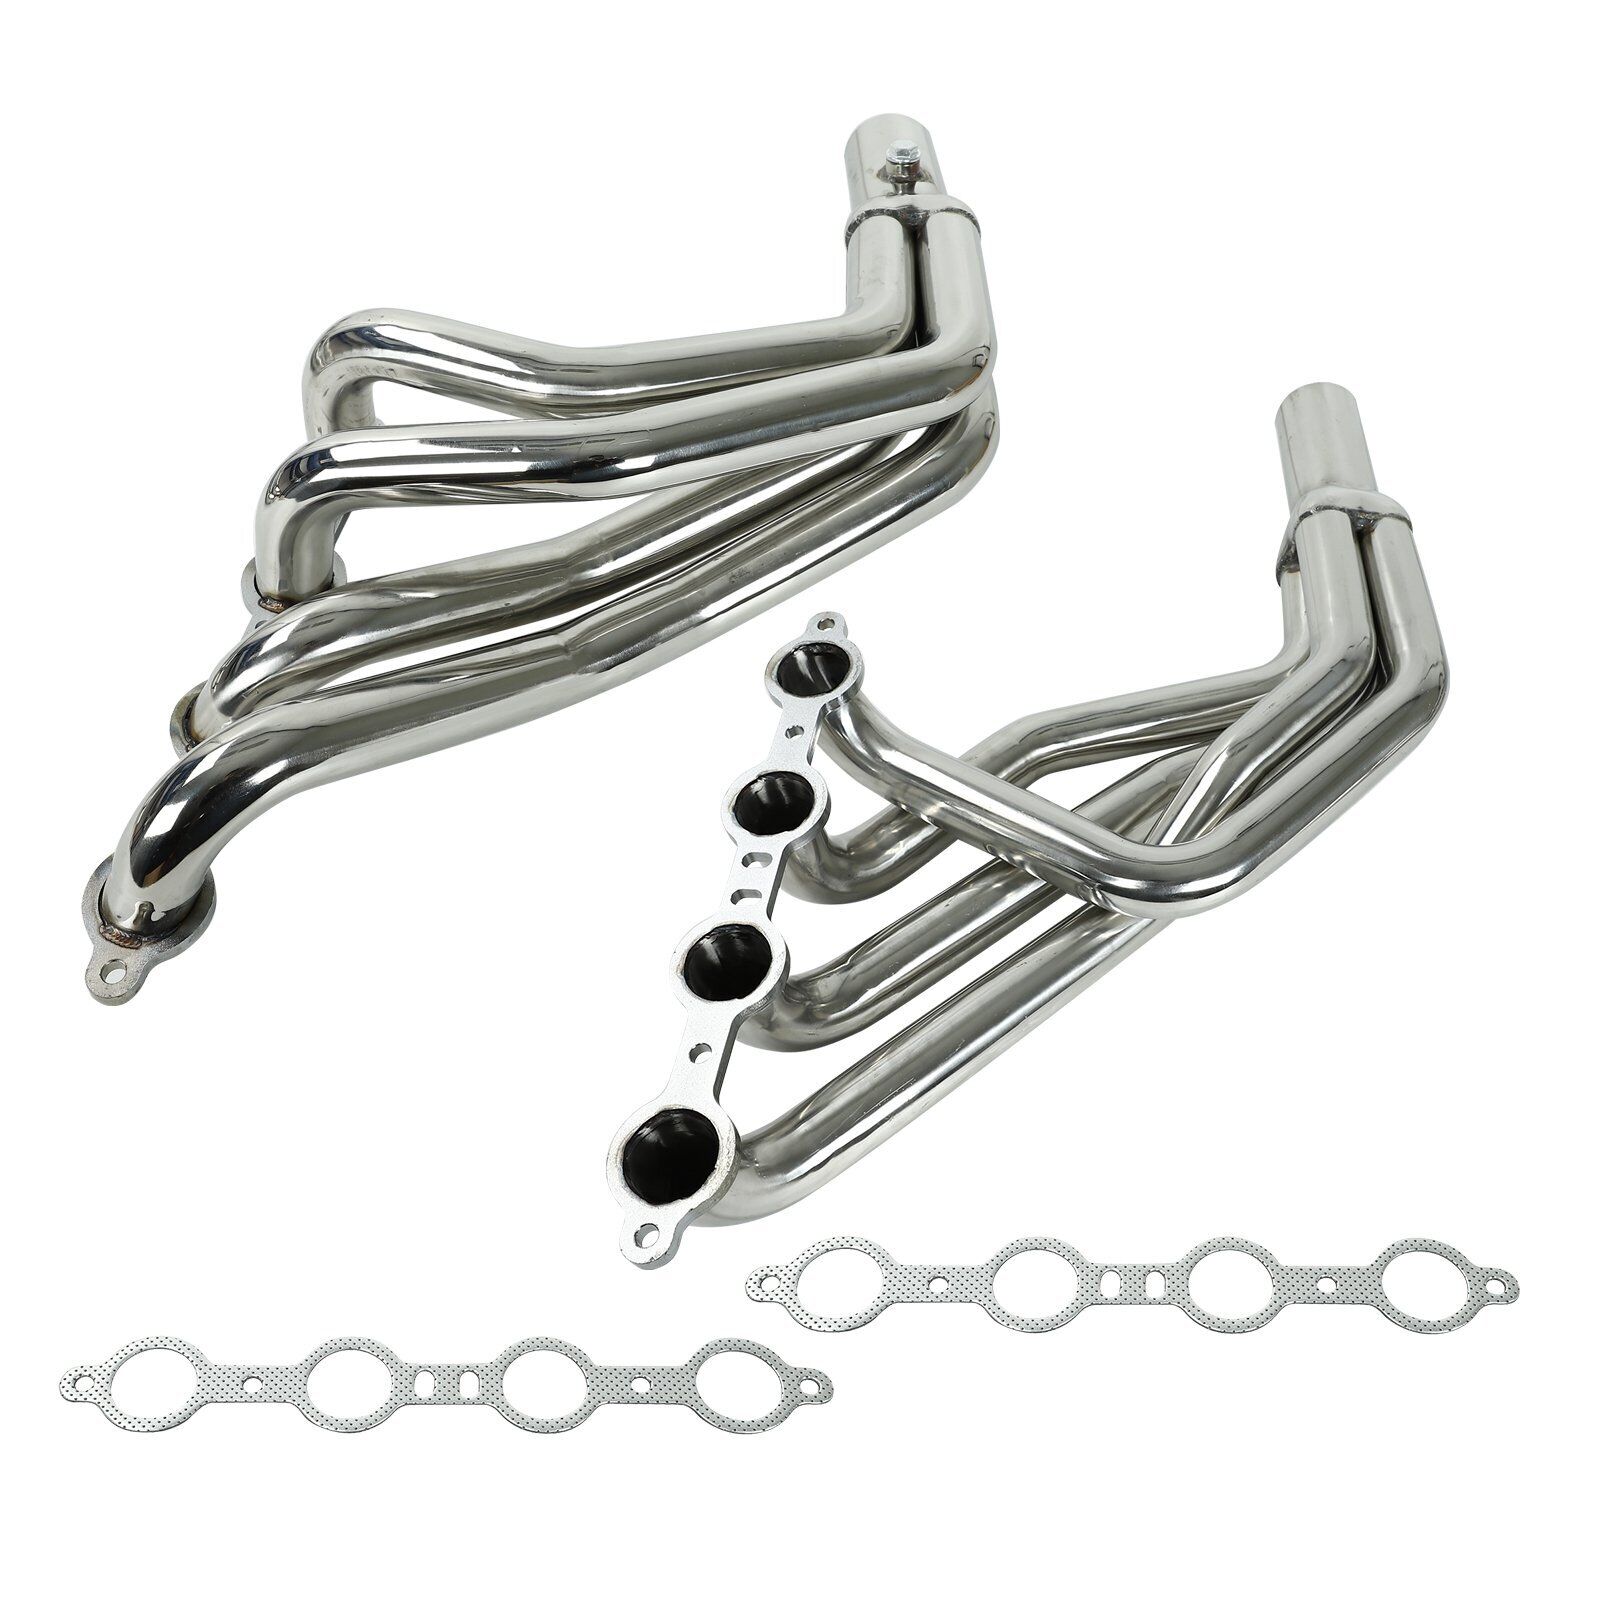 Exhaust Manifold Headers for Ford 79-93 Fox Body Mustang 94-04 Mustang 4.8L 5.3L